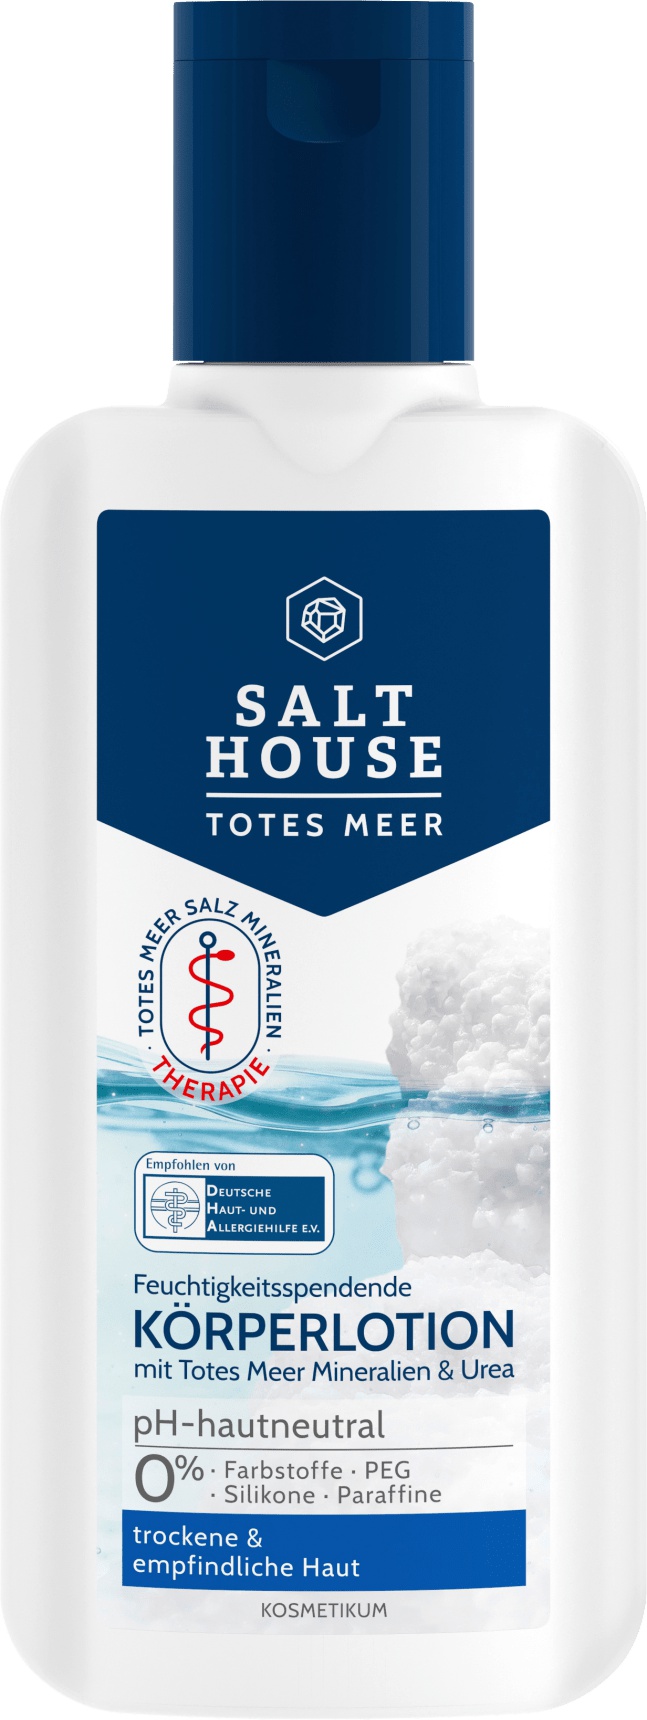 Salthouse Totes Meer Bodylotion Totes Meer Therapie